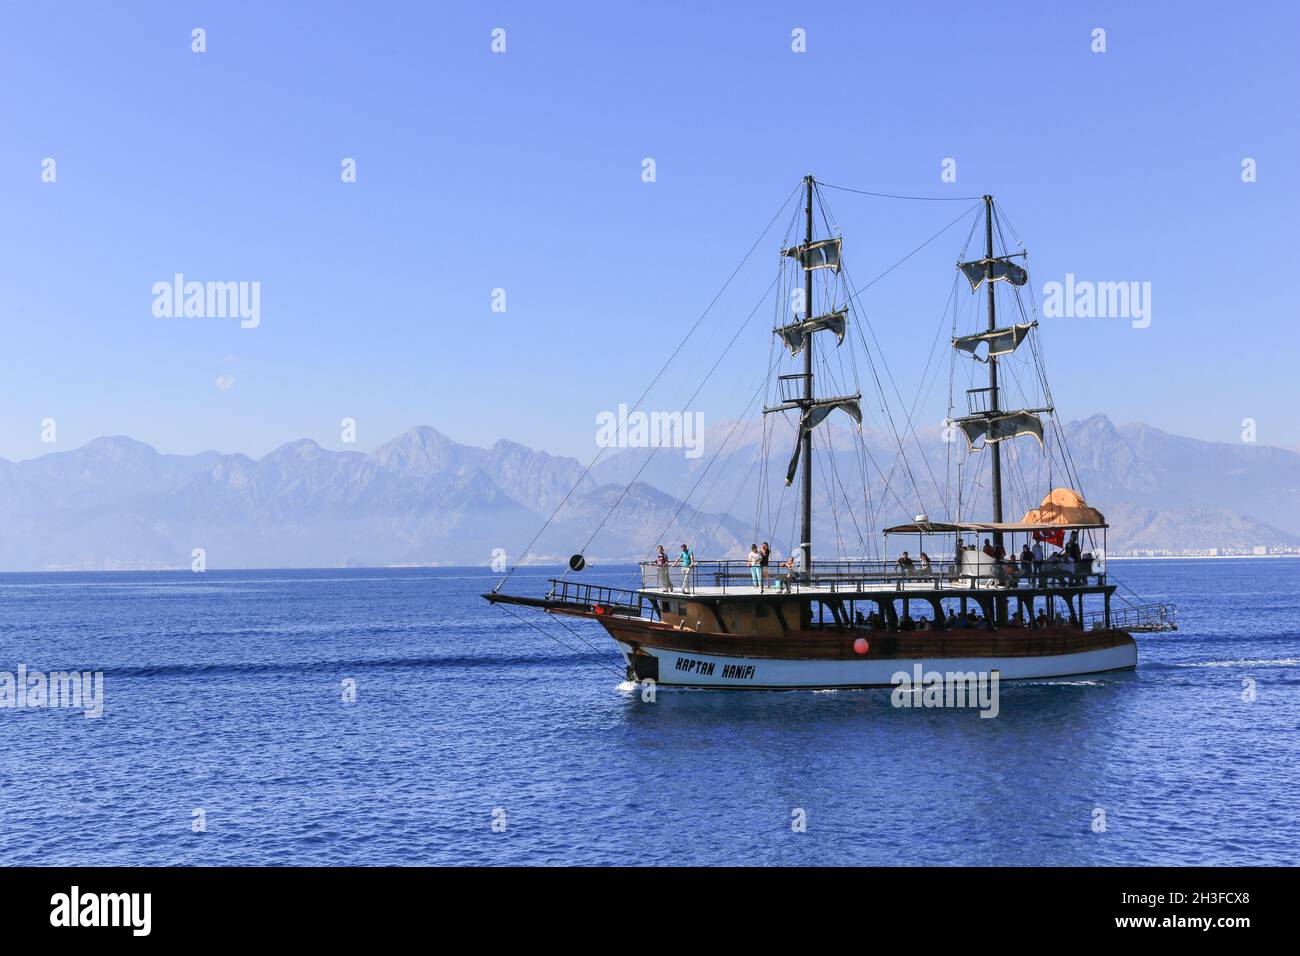 The tourist boat Kaptan Hanifi is heading southeast along the Antalya coast in southern Turkey with a group of tourists on a sightseeing cruise. Stock Photo